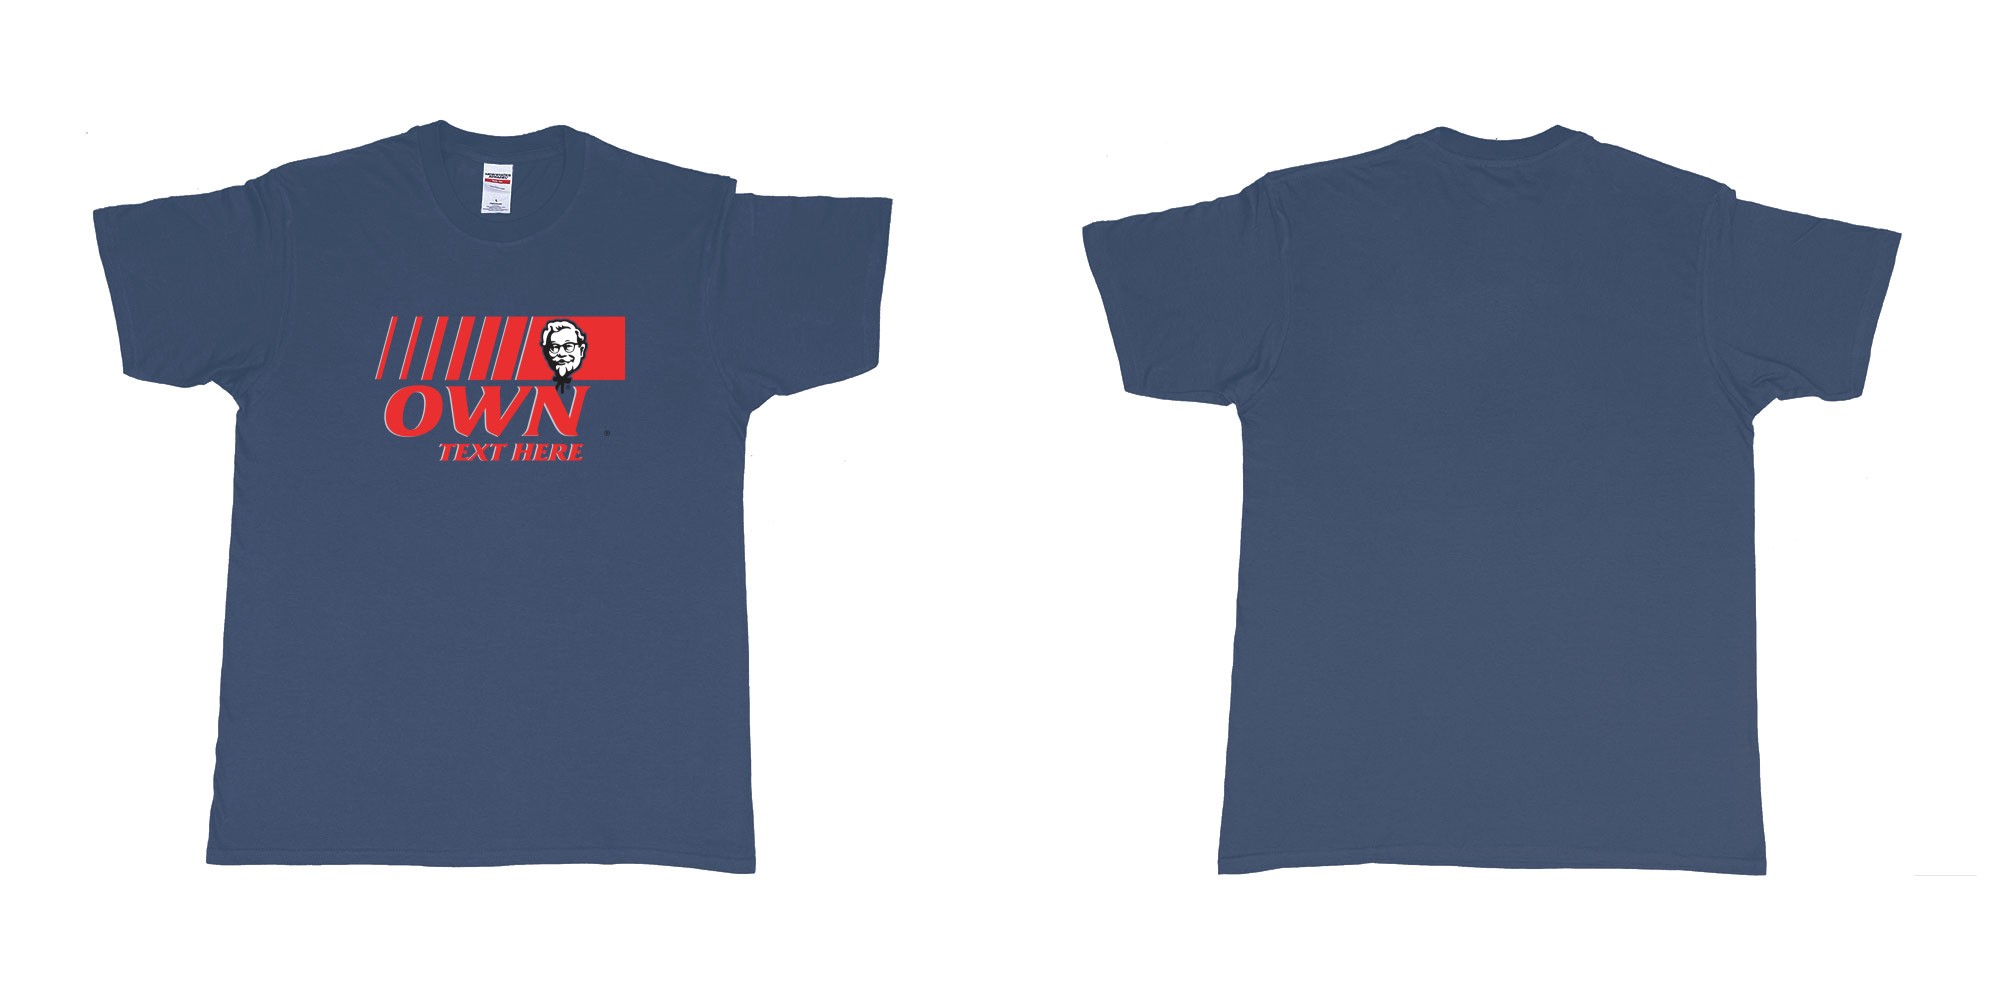 Custom tshirt design KFC in fabric color navy choice your own text made in Bali by The Pirate Way